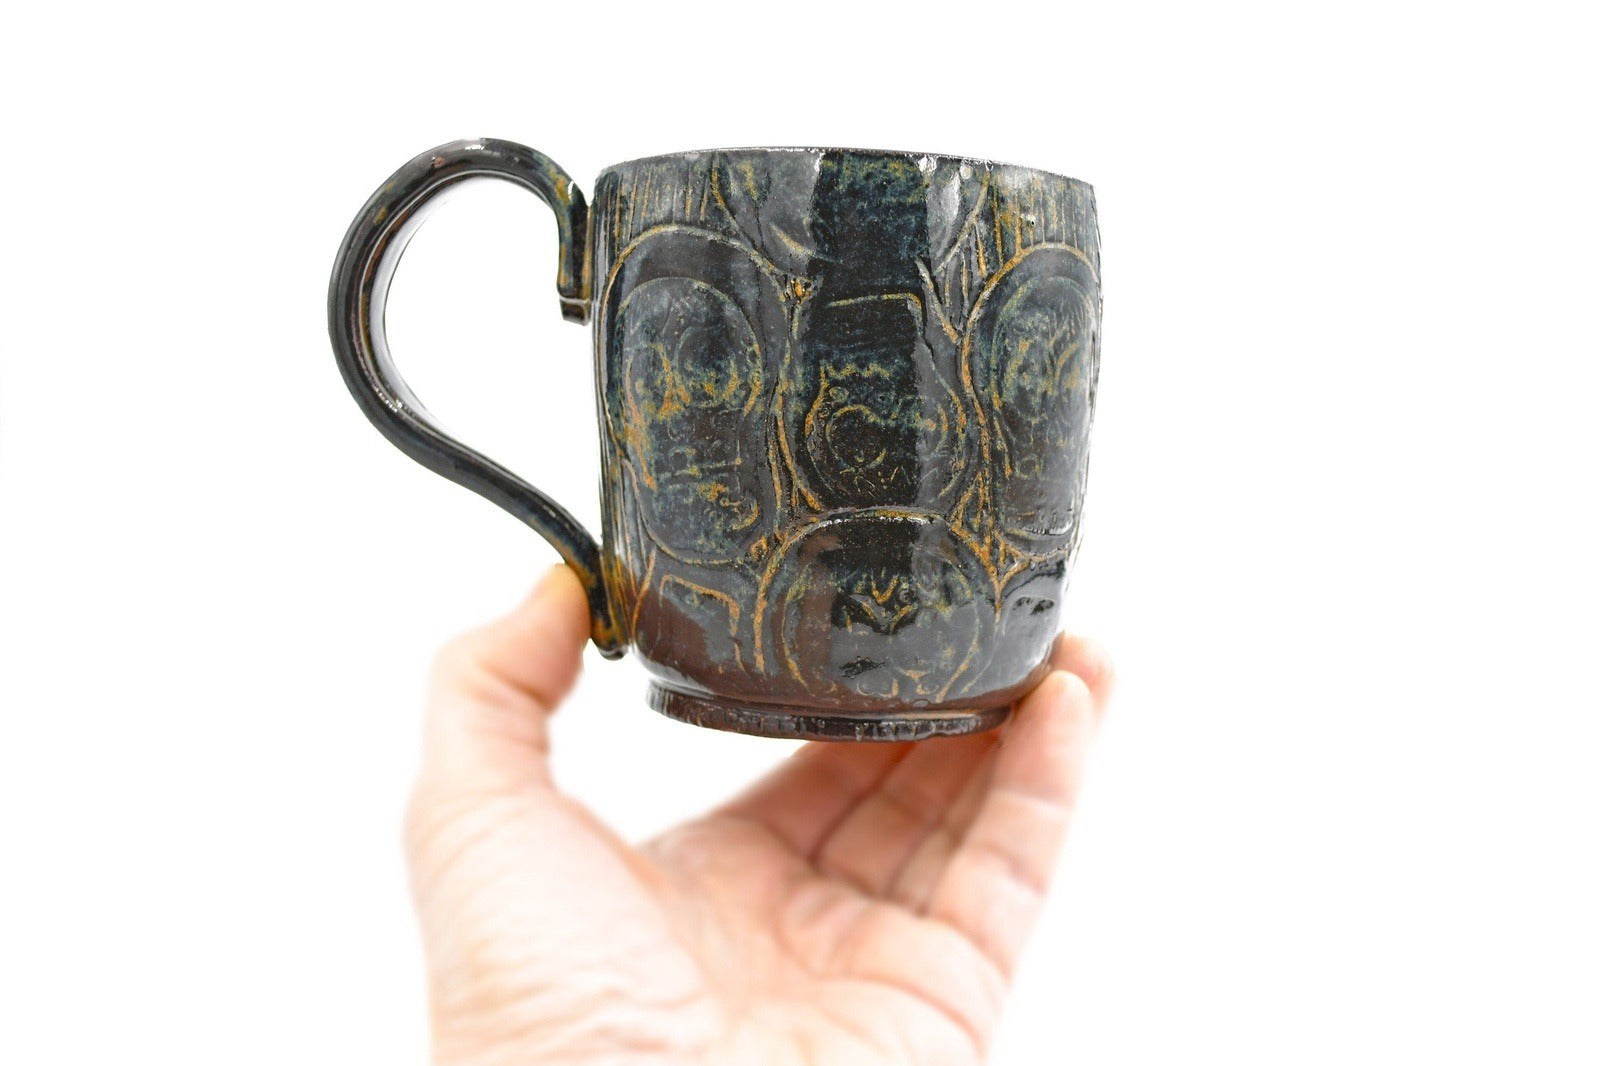 Black Brown Sugar Skull Coffee Mug, Rustic Stoneware Pottery Ceramic Cup, Punk Gothic, Handmade Coffee Lover Gift, Day of The Dead